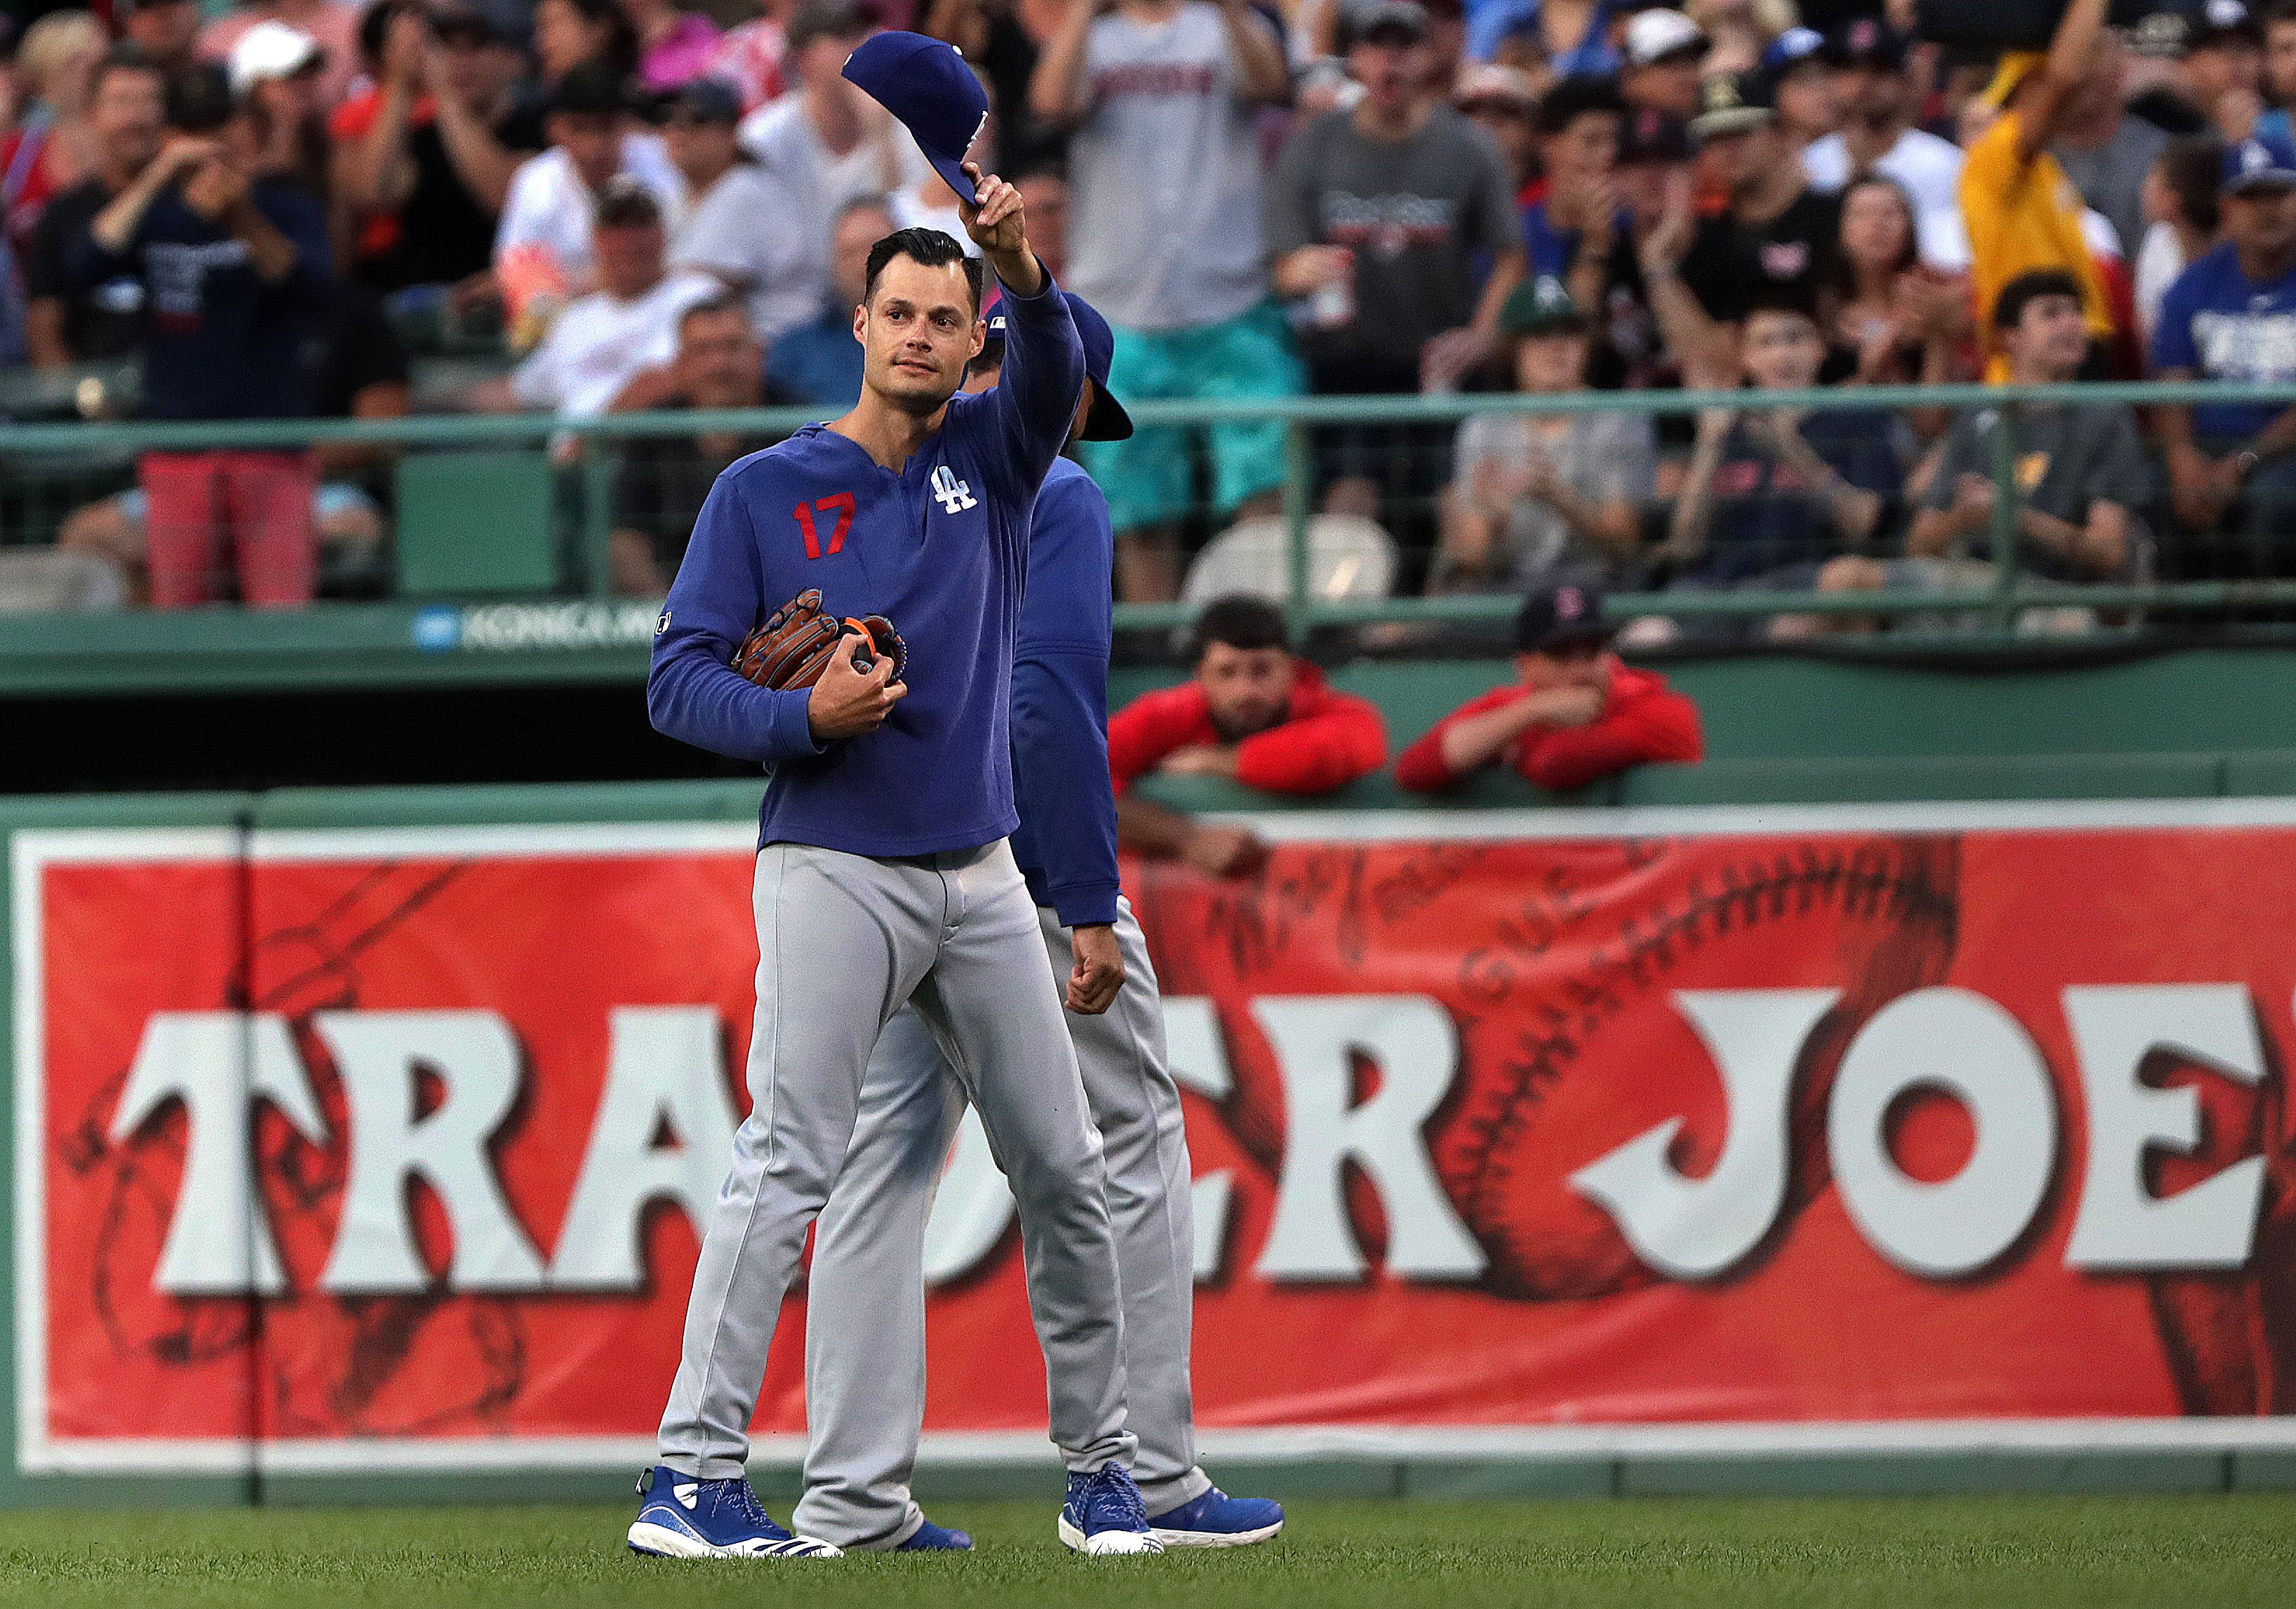 My Weekend with the Salem Red Sox, by Patrick J. Regal, The Boy Who Loved  Joe Kelly